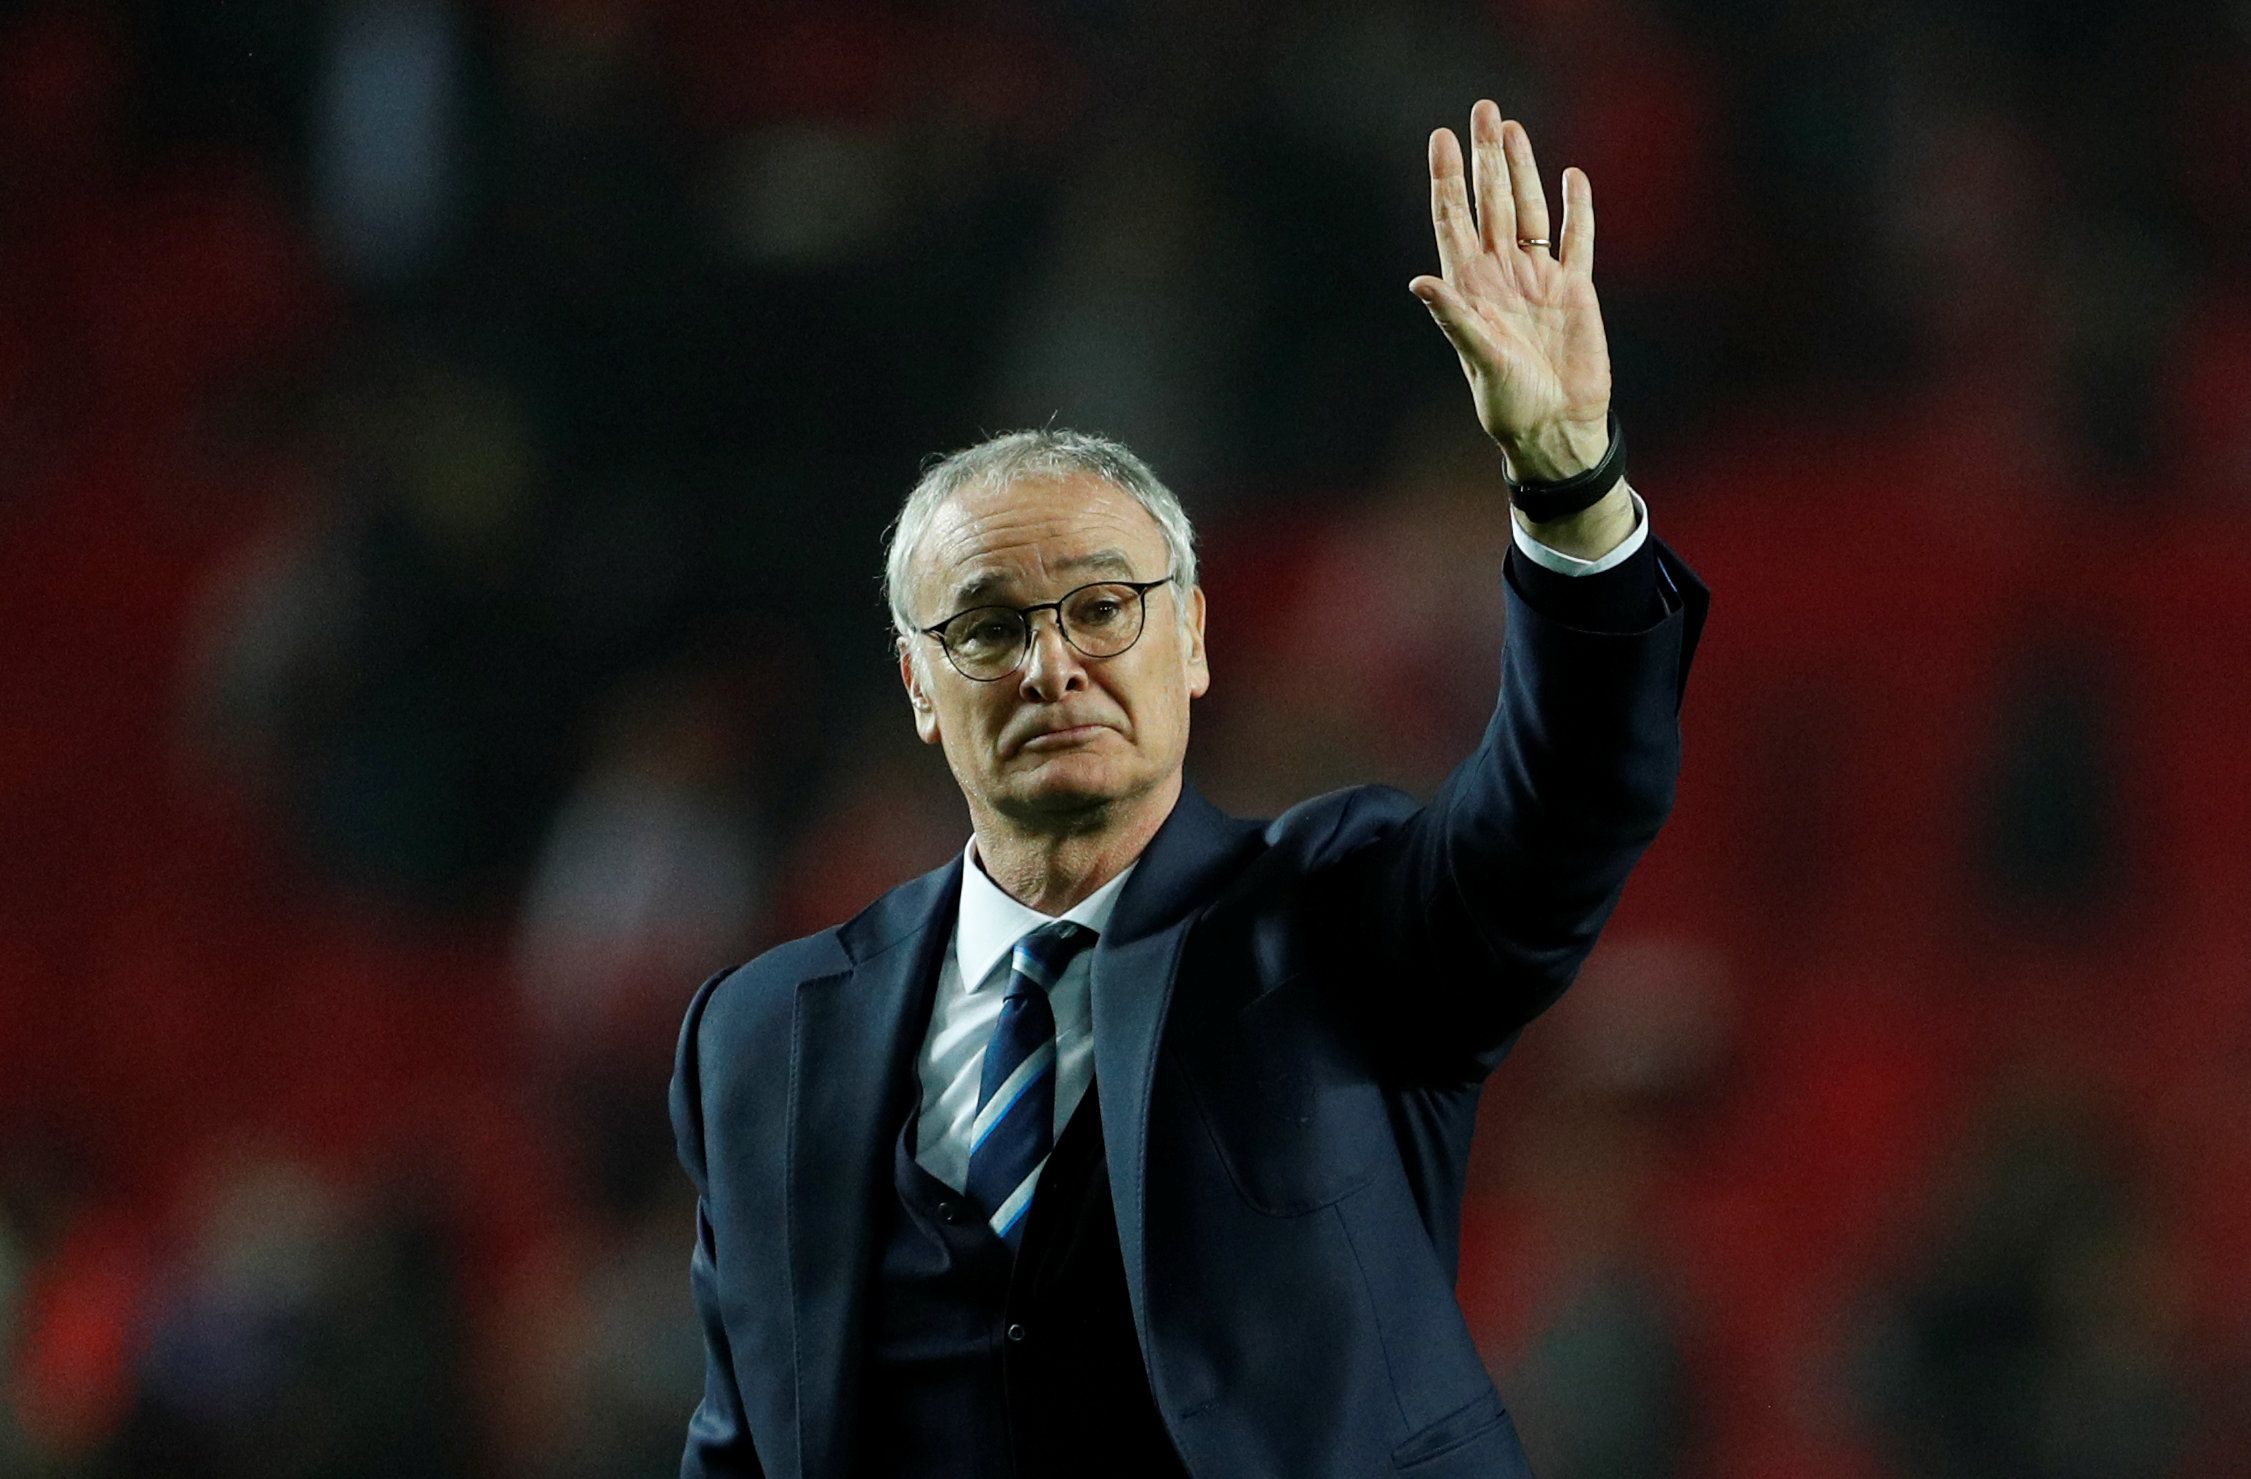 FILE PHOTO Soccer Football - Sevilla v Leicester City - UEFA Champions League Round of 16 First Leg - Ramon Sanchez Pizjuan Stadium, Seville, Spain - 22/2/17 Leicester City manager Claudio Ranieri after the match Action Images via Reuters/John Sibley Livepic/File Photo